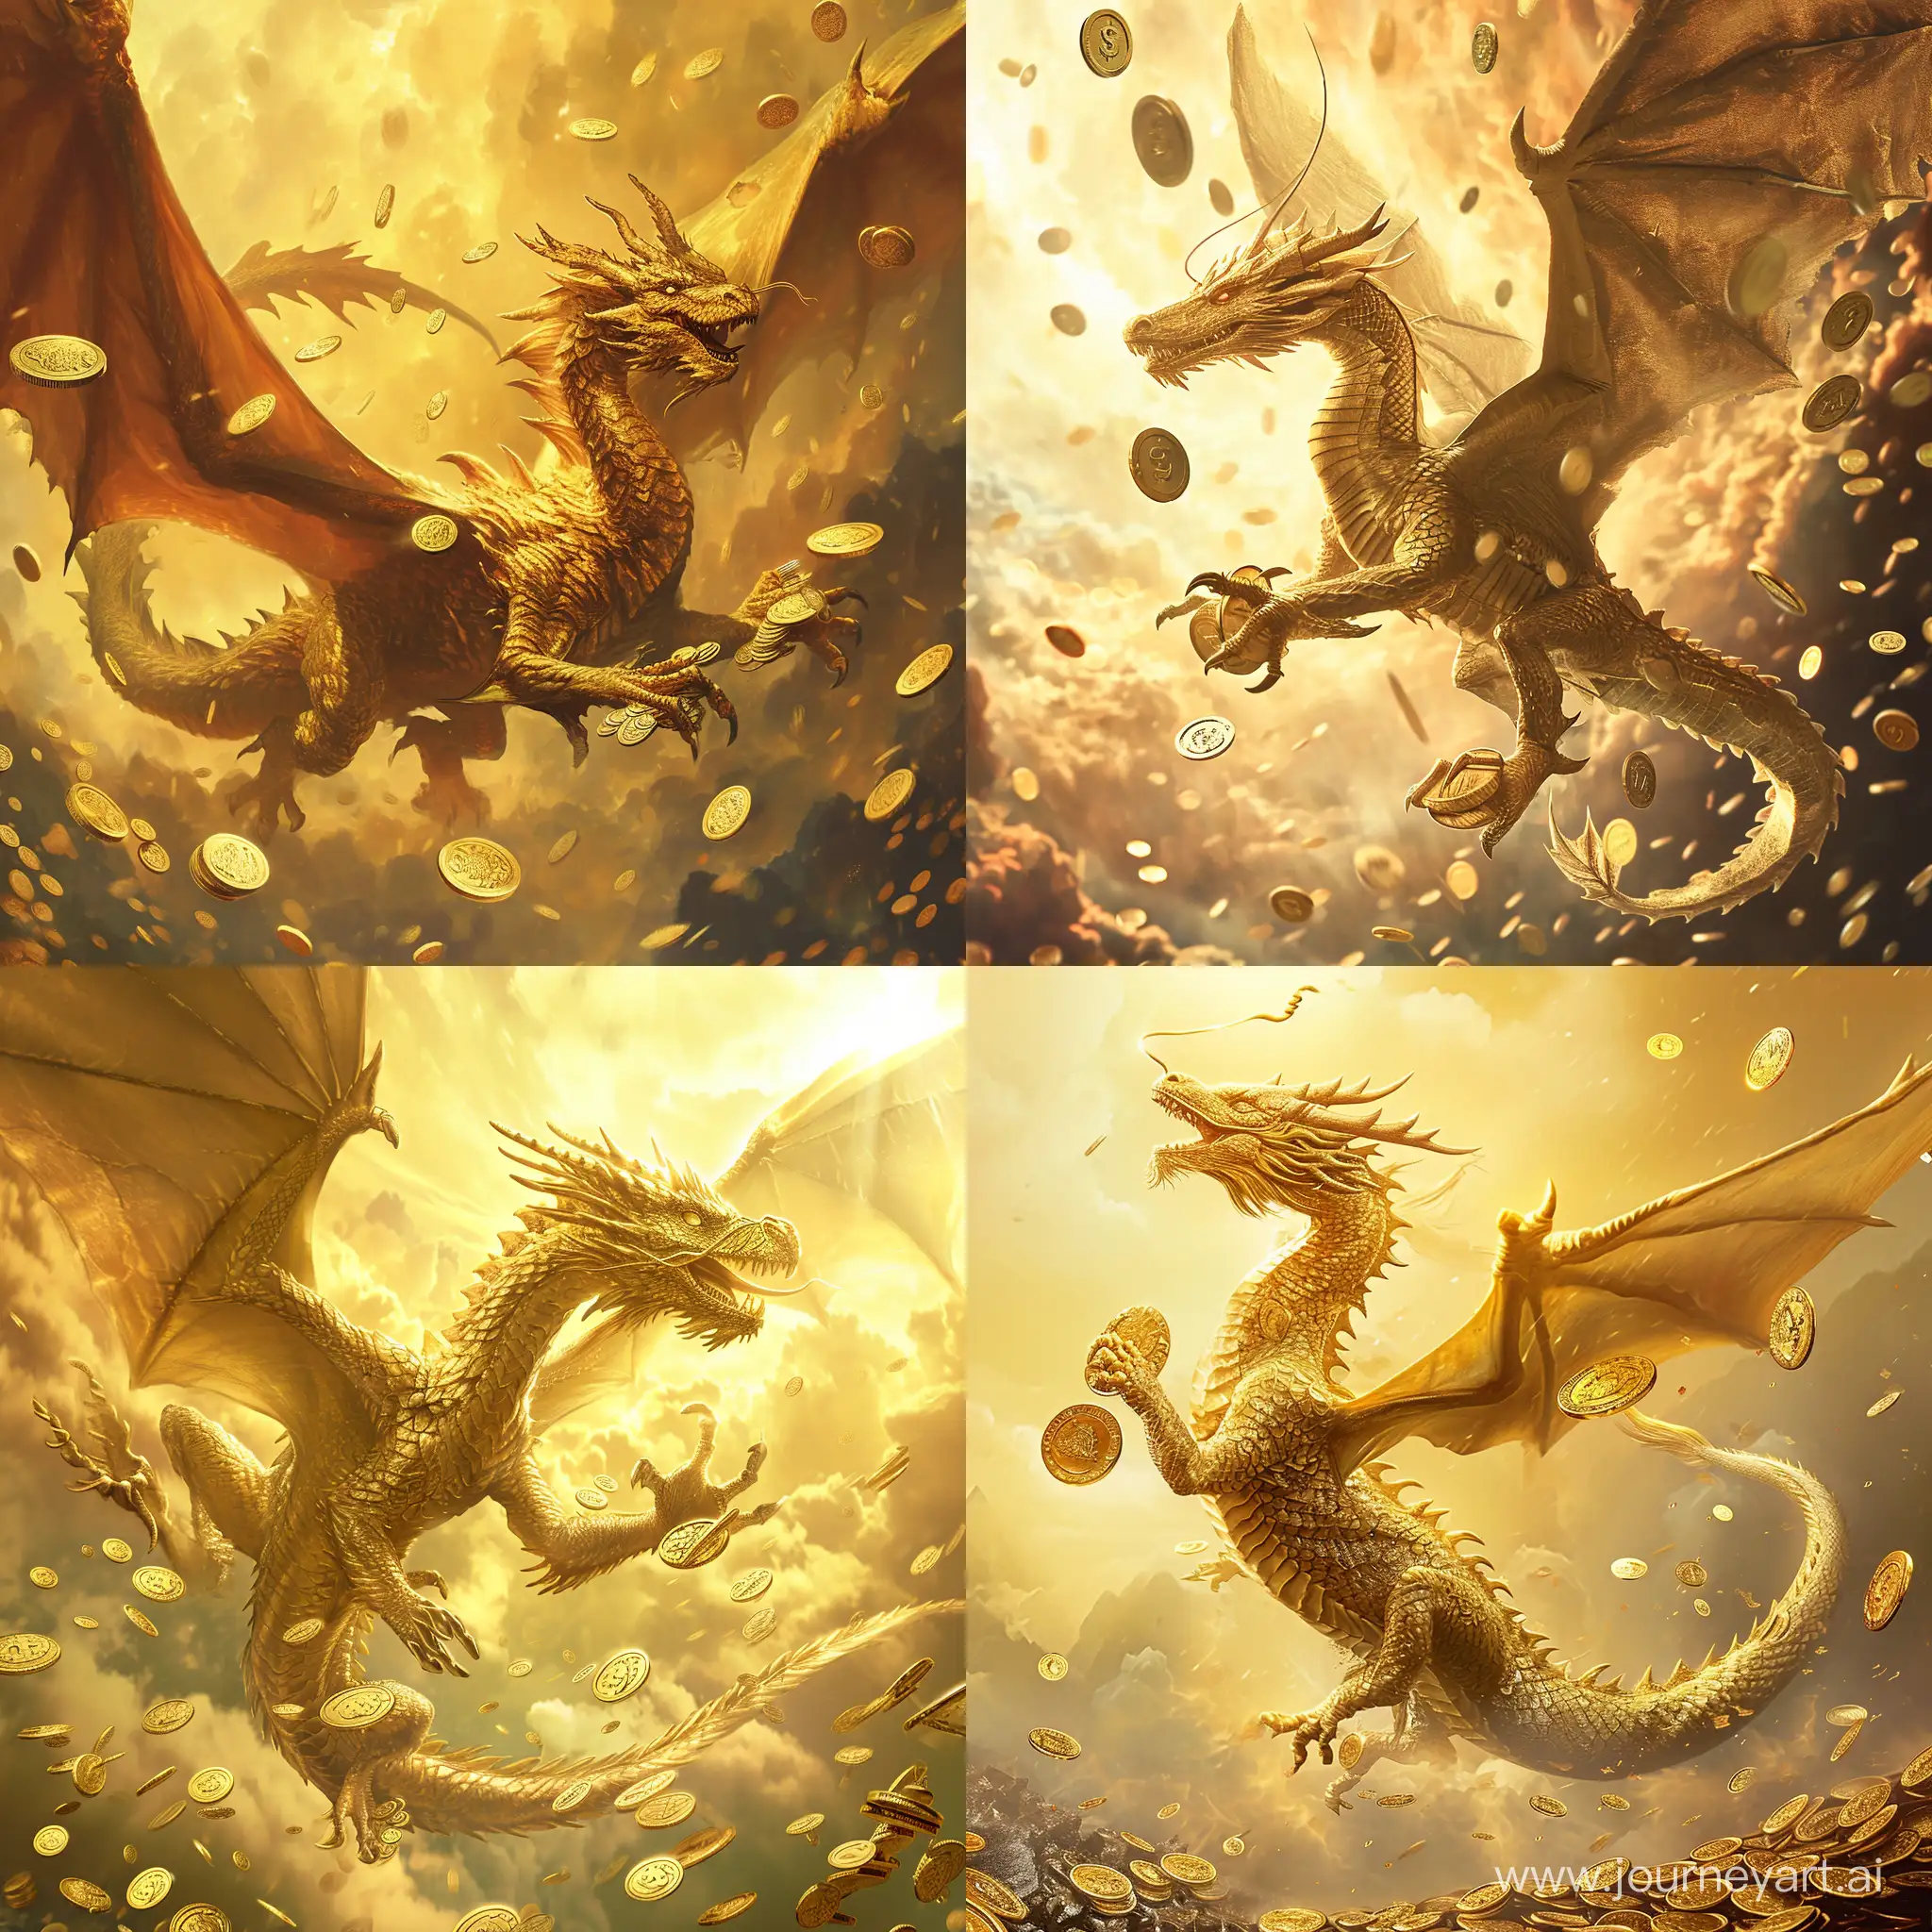 Majestic-Golden-Dragon-Soaring-Amidst-a-Shimmering-Sky-of-Wealth